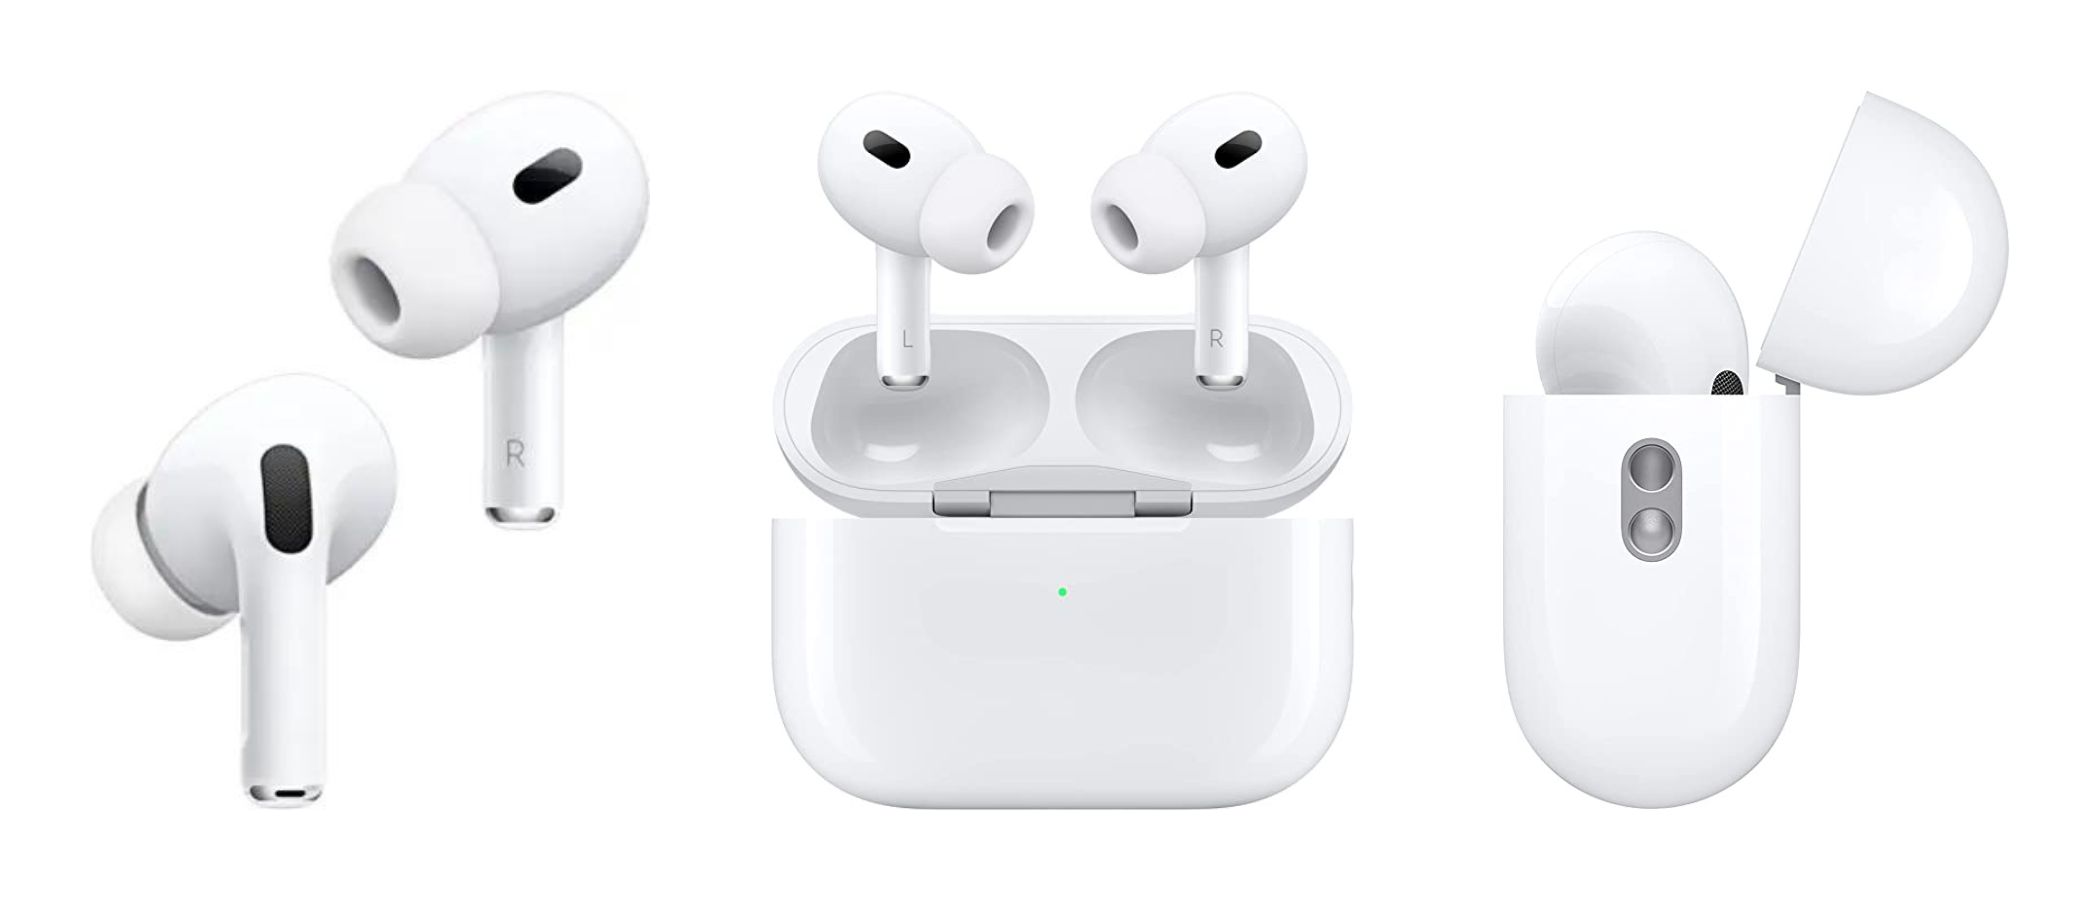 The latest AirPods Pro are just $189 for Prime Day — their lowest price ever